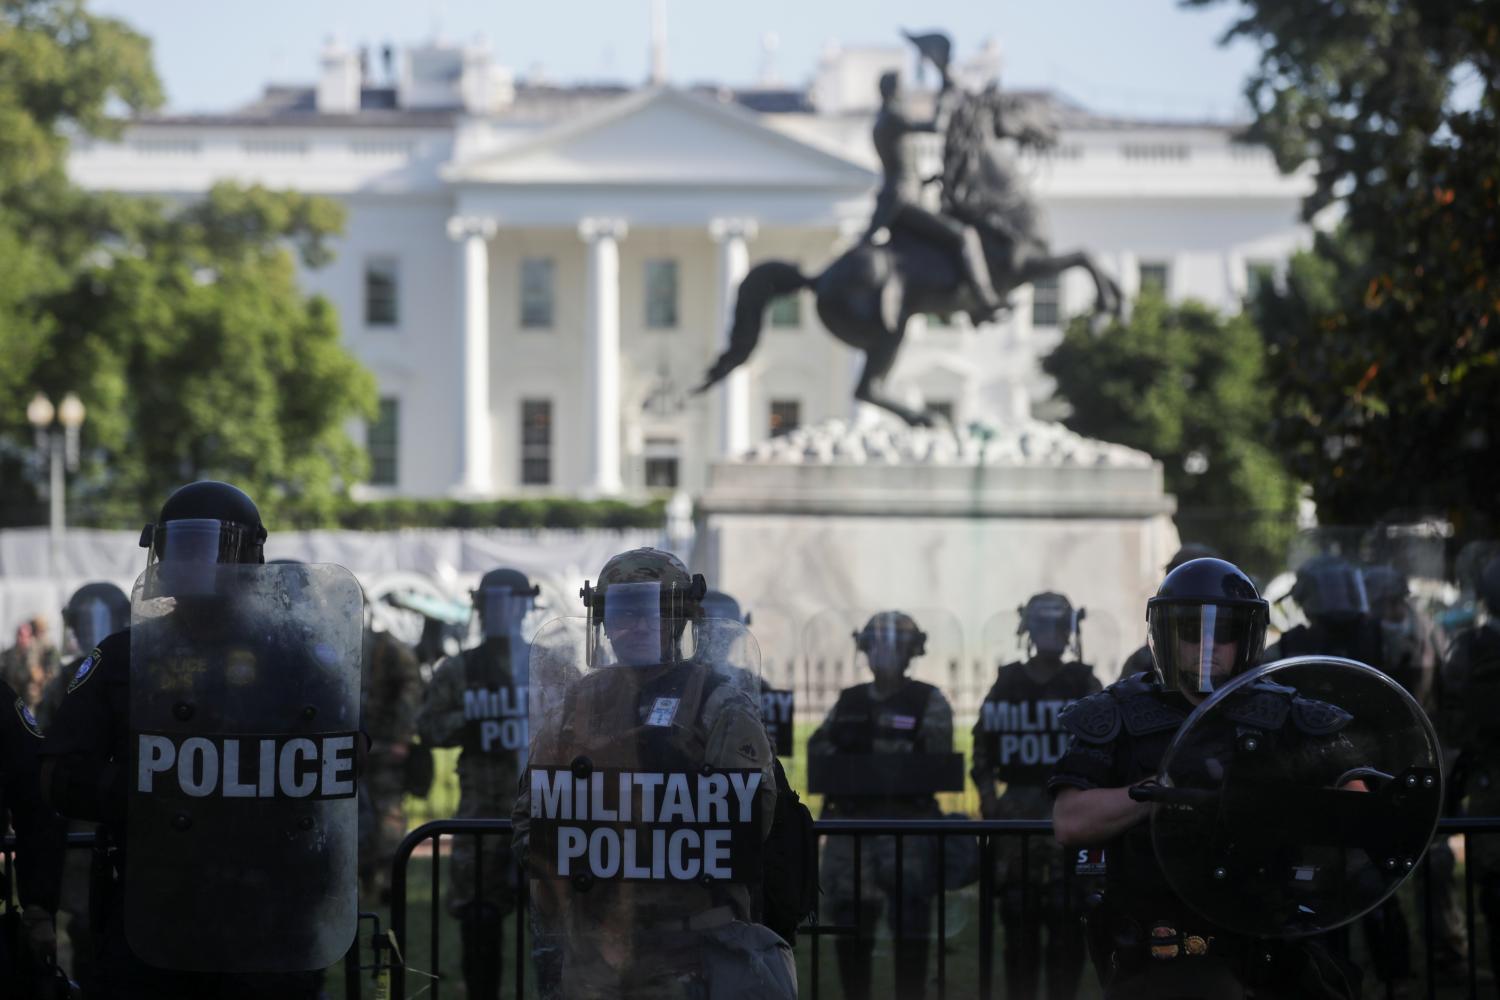 FILE PHOTO: DC National Guard military police officers look on as demonstrators rally near the White House against the death in Minneapolis police custody of George Floyd, in Washington, D.C., U.S., June 1, 2020. REUTERS/Jonathan Ernst/File Photo